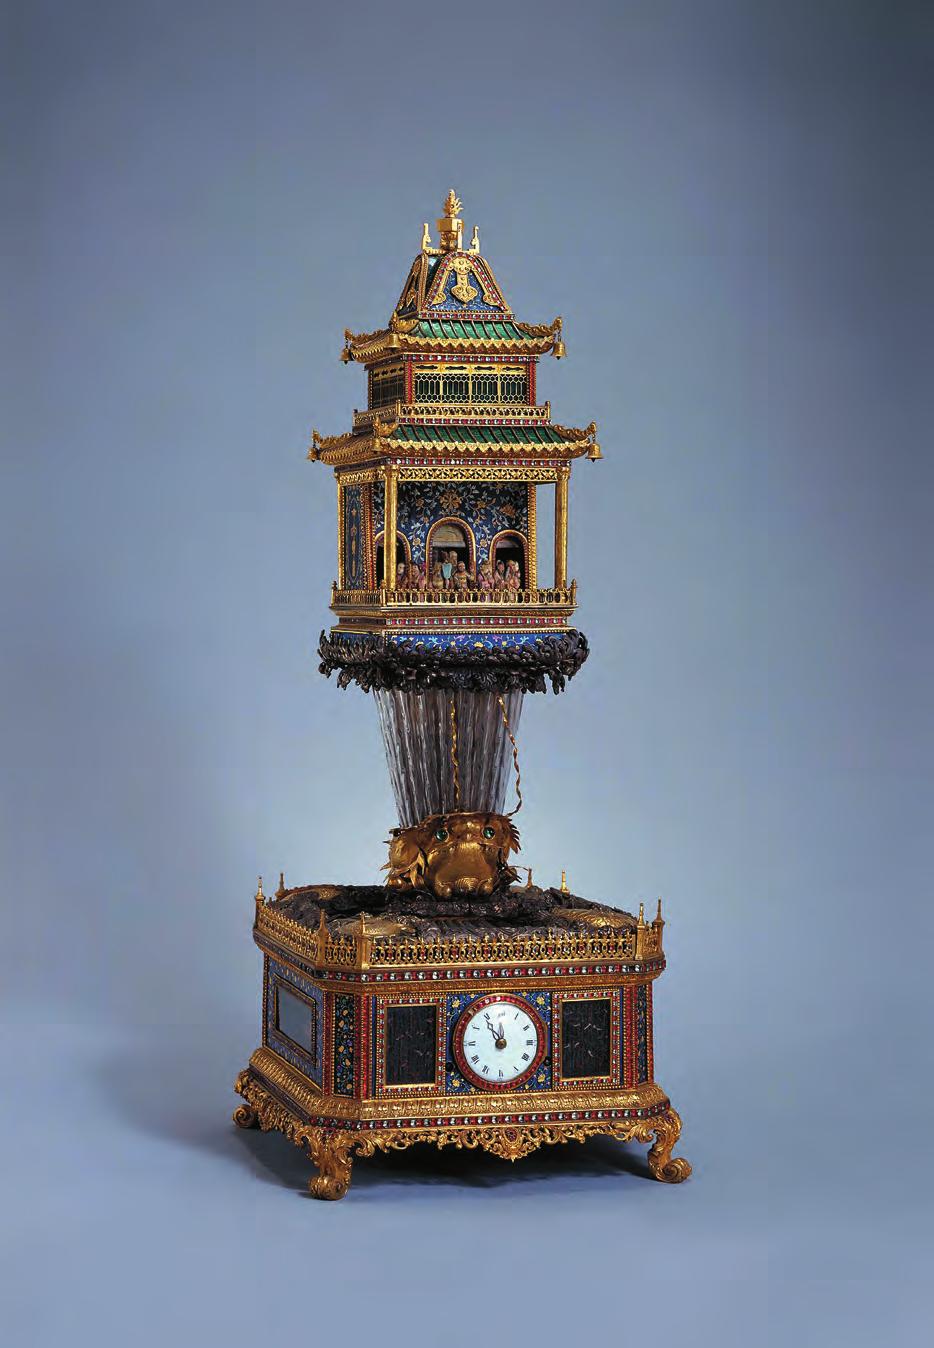 21 Gilt-Bronze Enamelled Pagoda Style Clock with Gods Giving Birthday Blessings Made in Guangzhou.